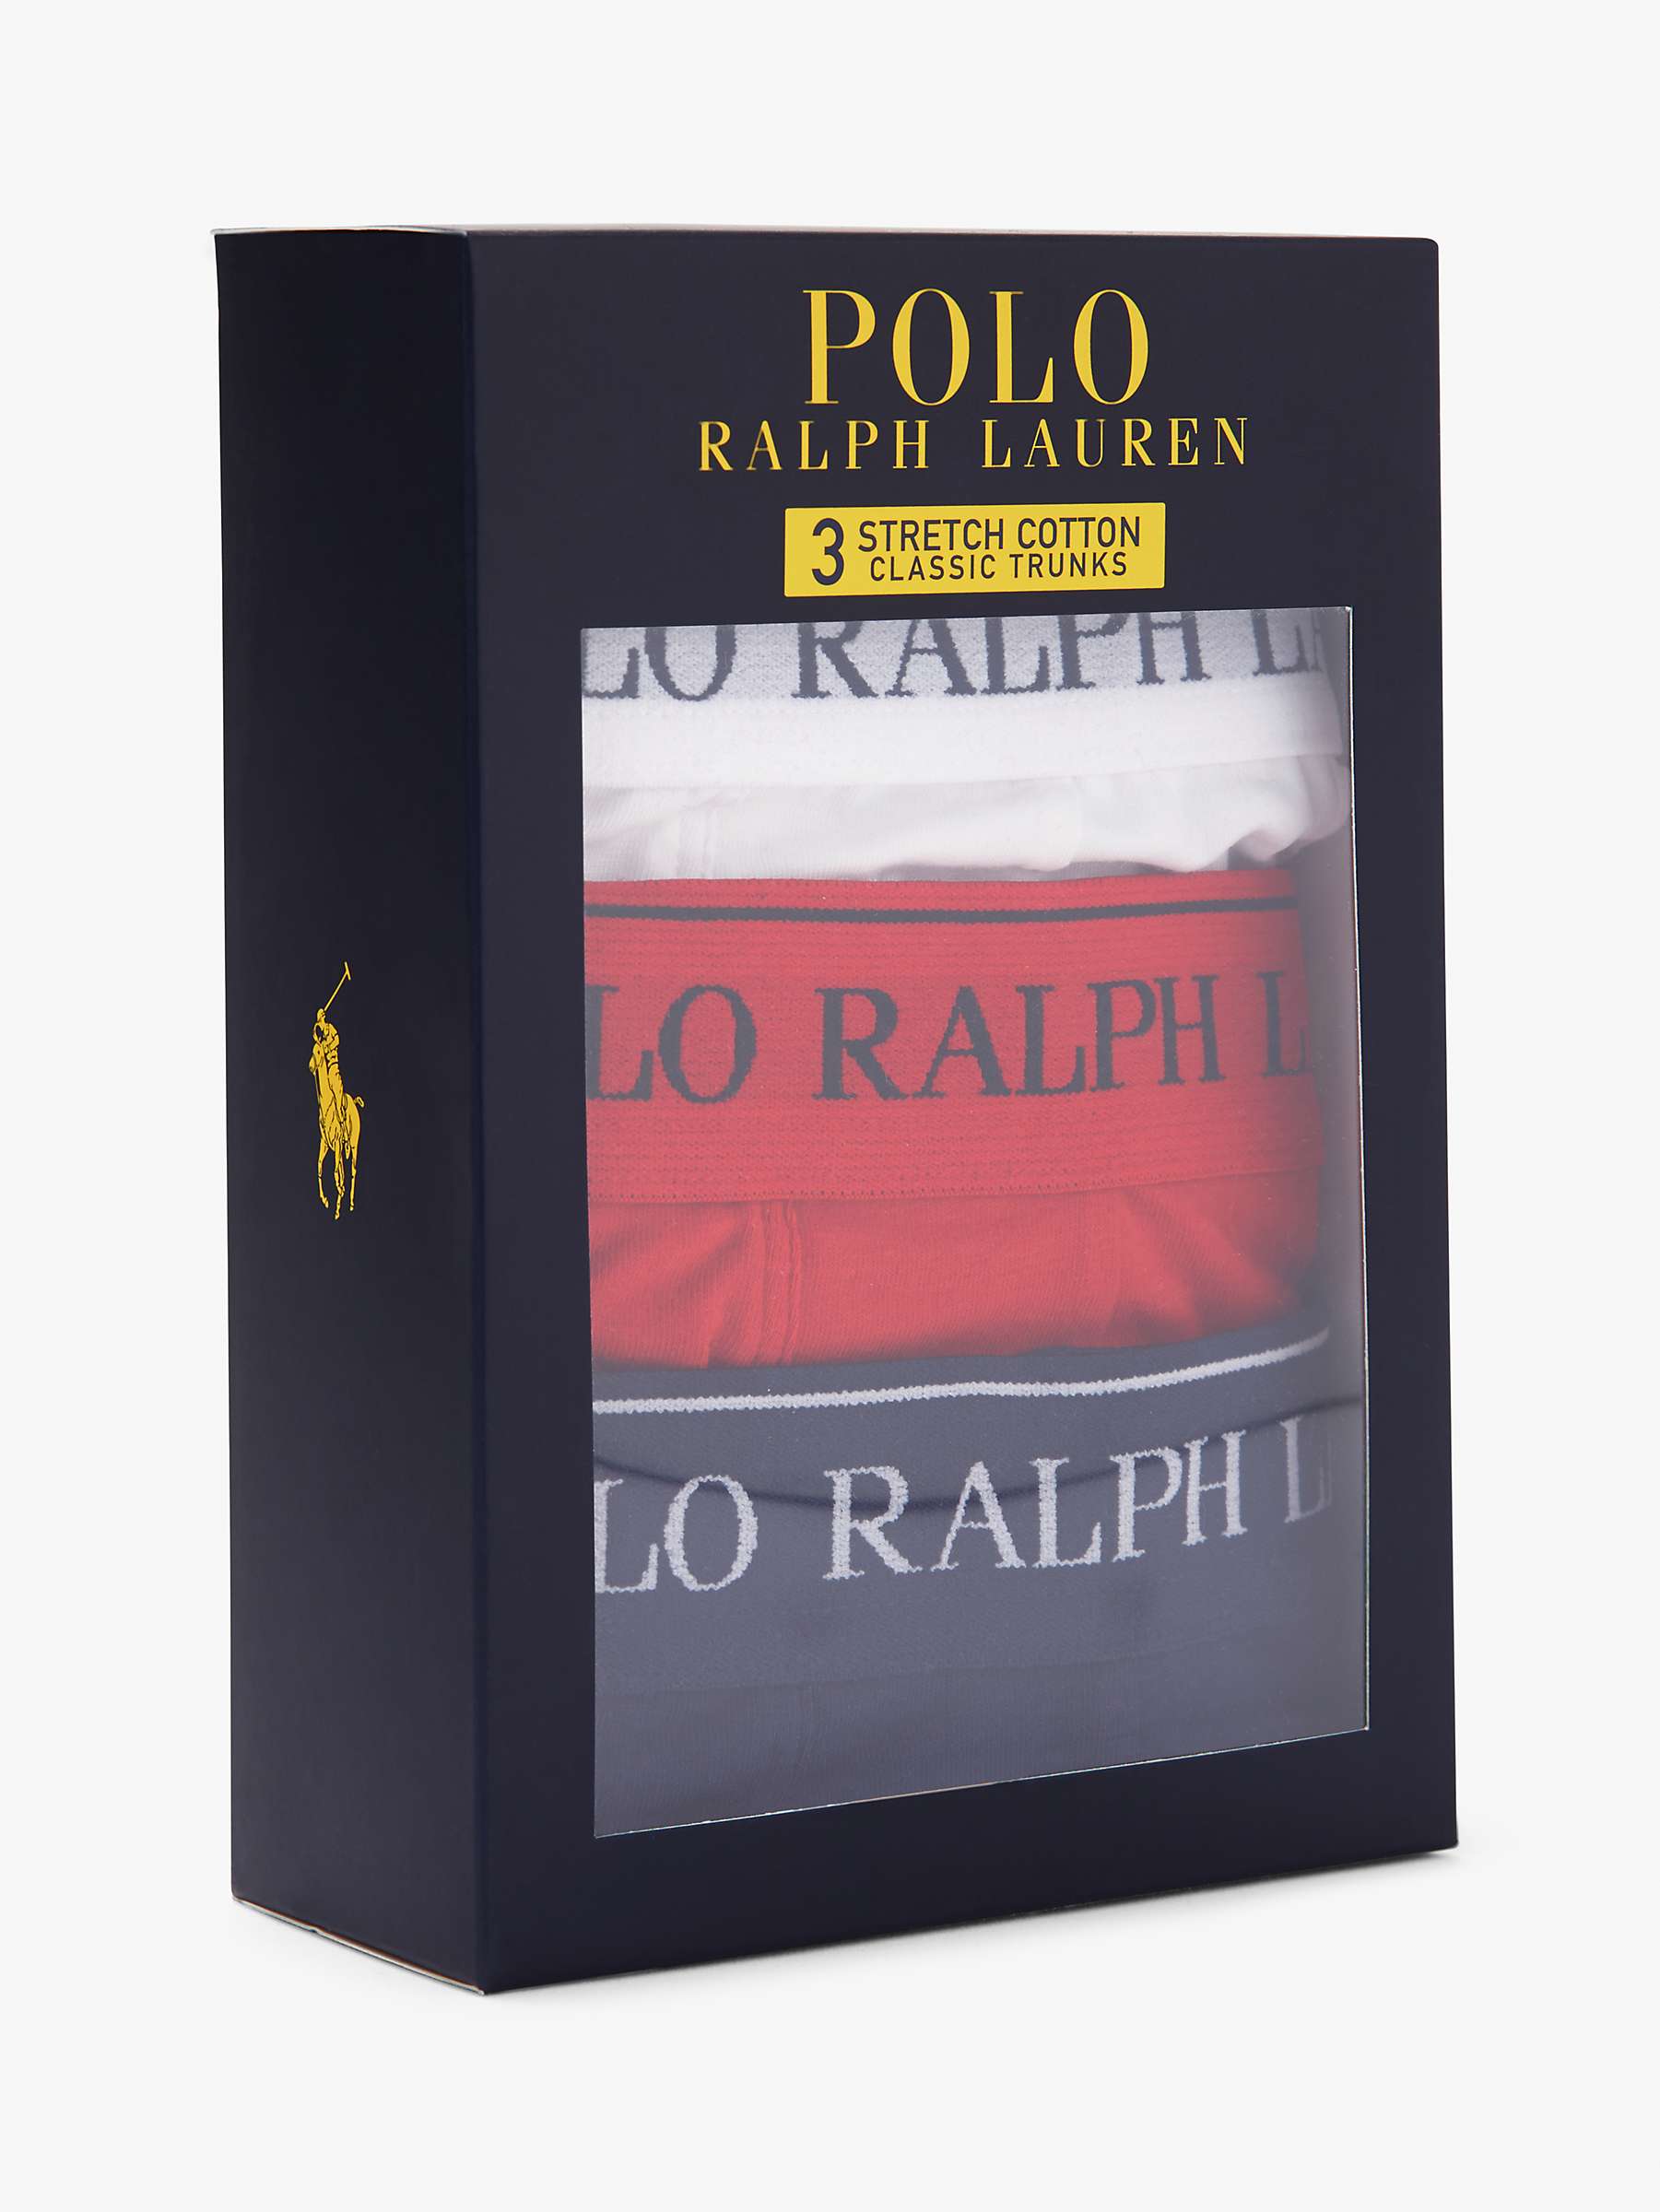 Buy Polo Ralph Lauren Stretch Cotton Trunks, Pack of 3, Blue/Red/White Online at johnlewis.com